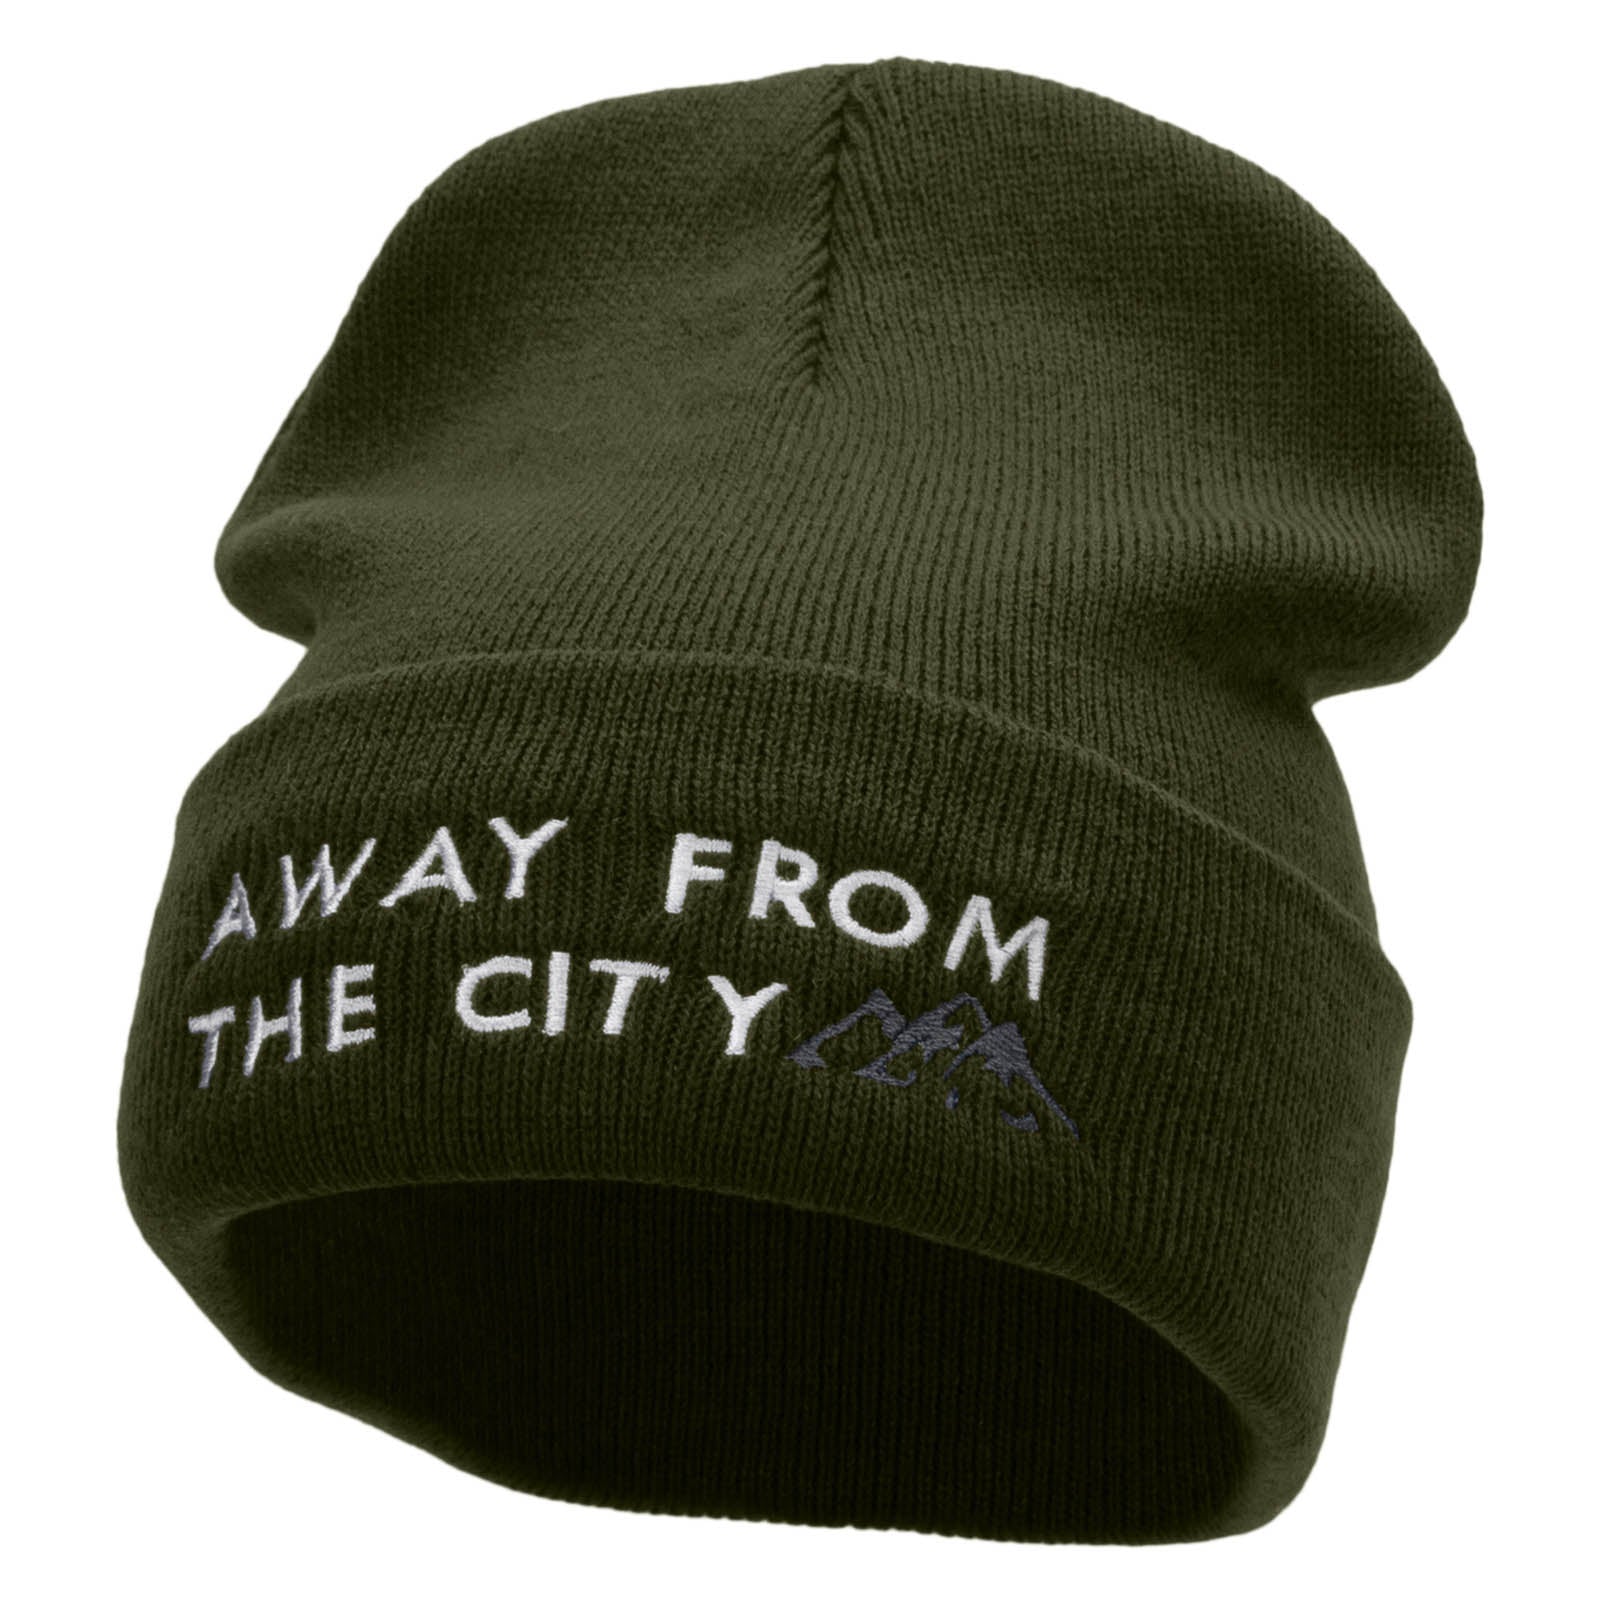 Away From The City Embroidered 12 Inch Long Knitted Beanie - Olive OSFM